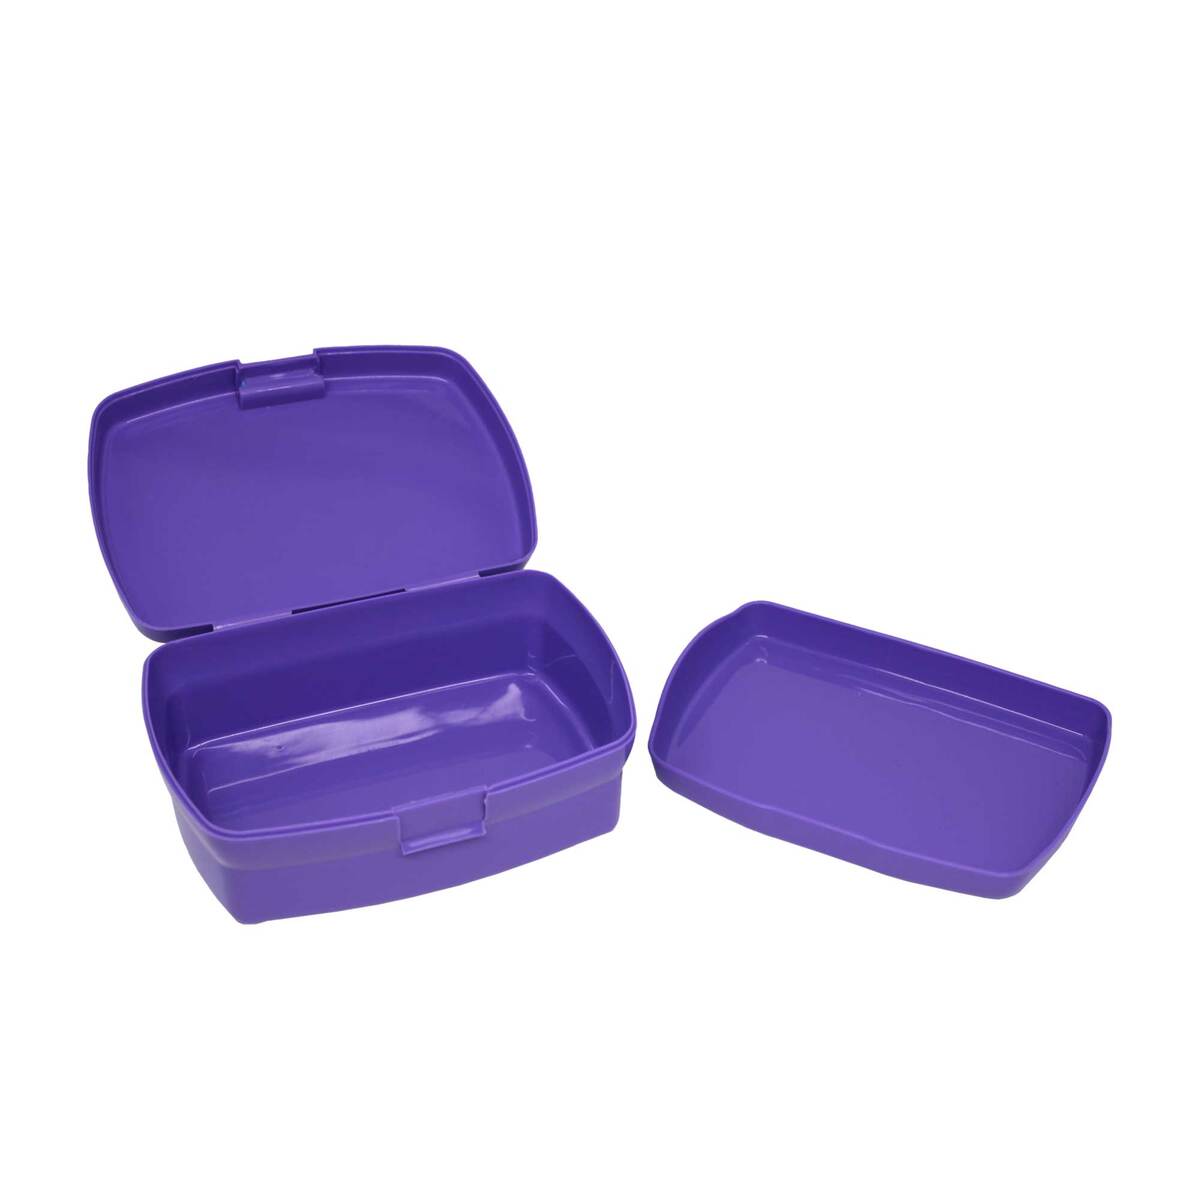 Frozen Sandwich Boxes With Inner Tray